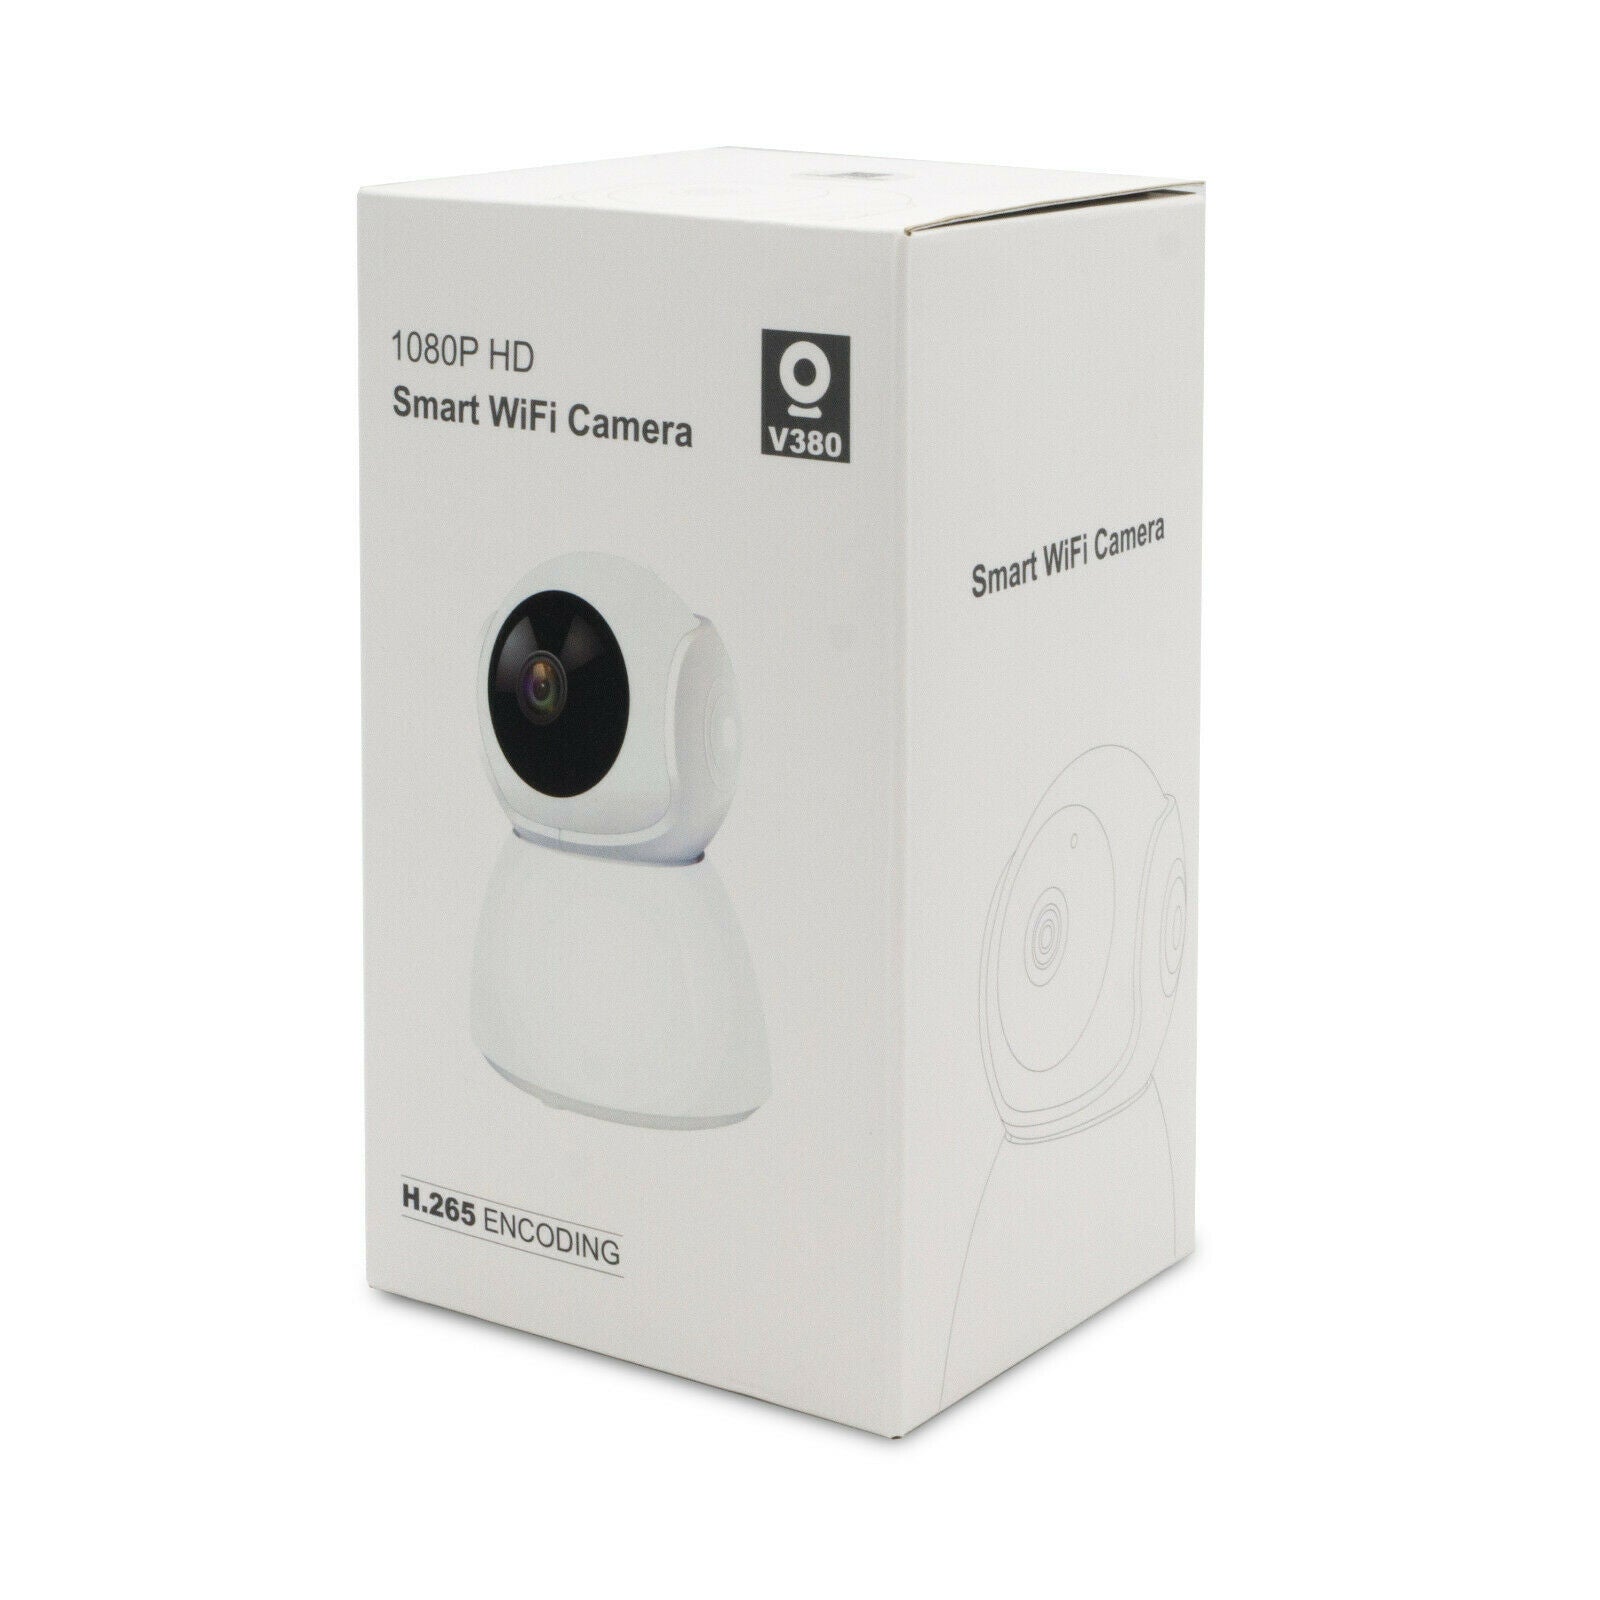 Cirago Home WiFi IP Camera 1080P HD Security with Night Vision, Motion Detection